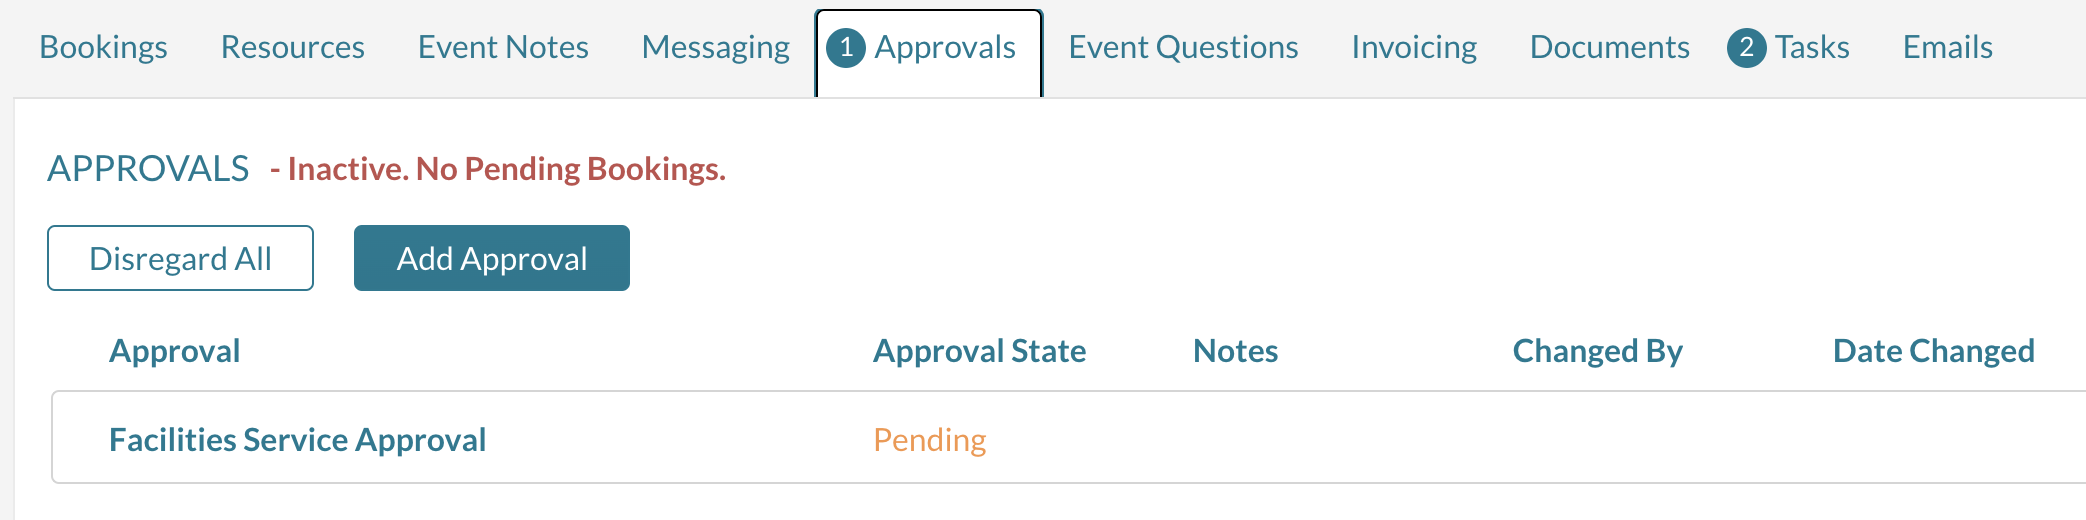 mazevo screenshot of inactive approvals